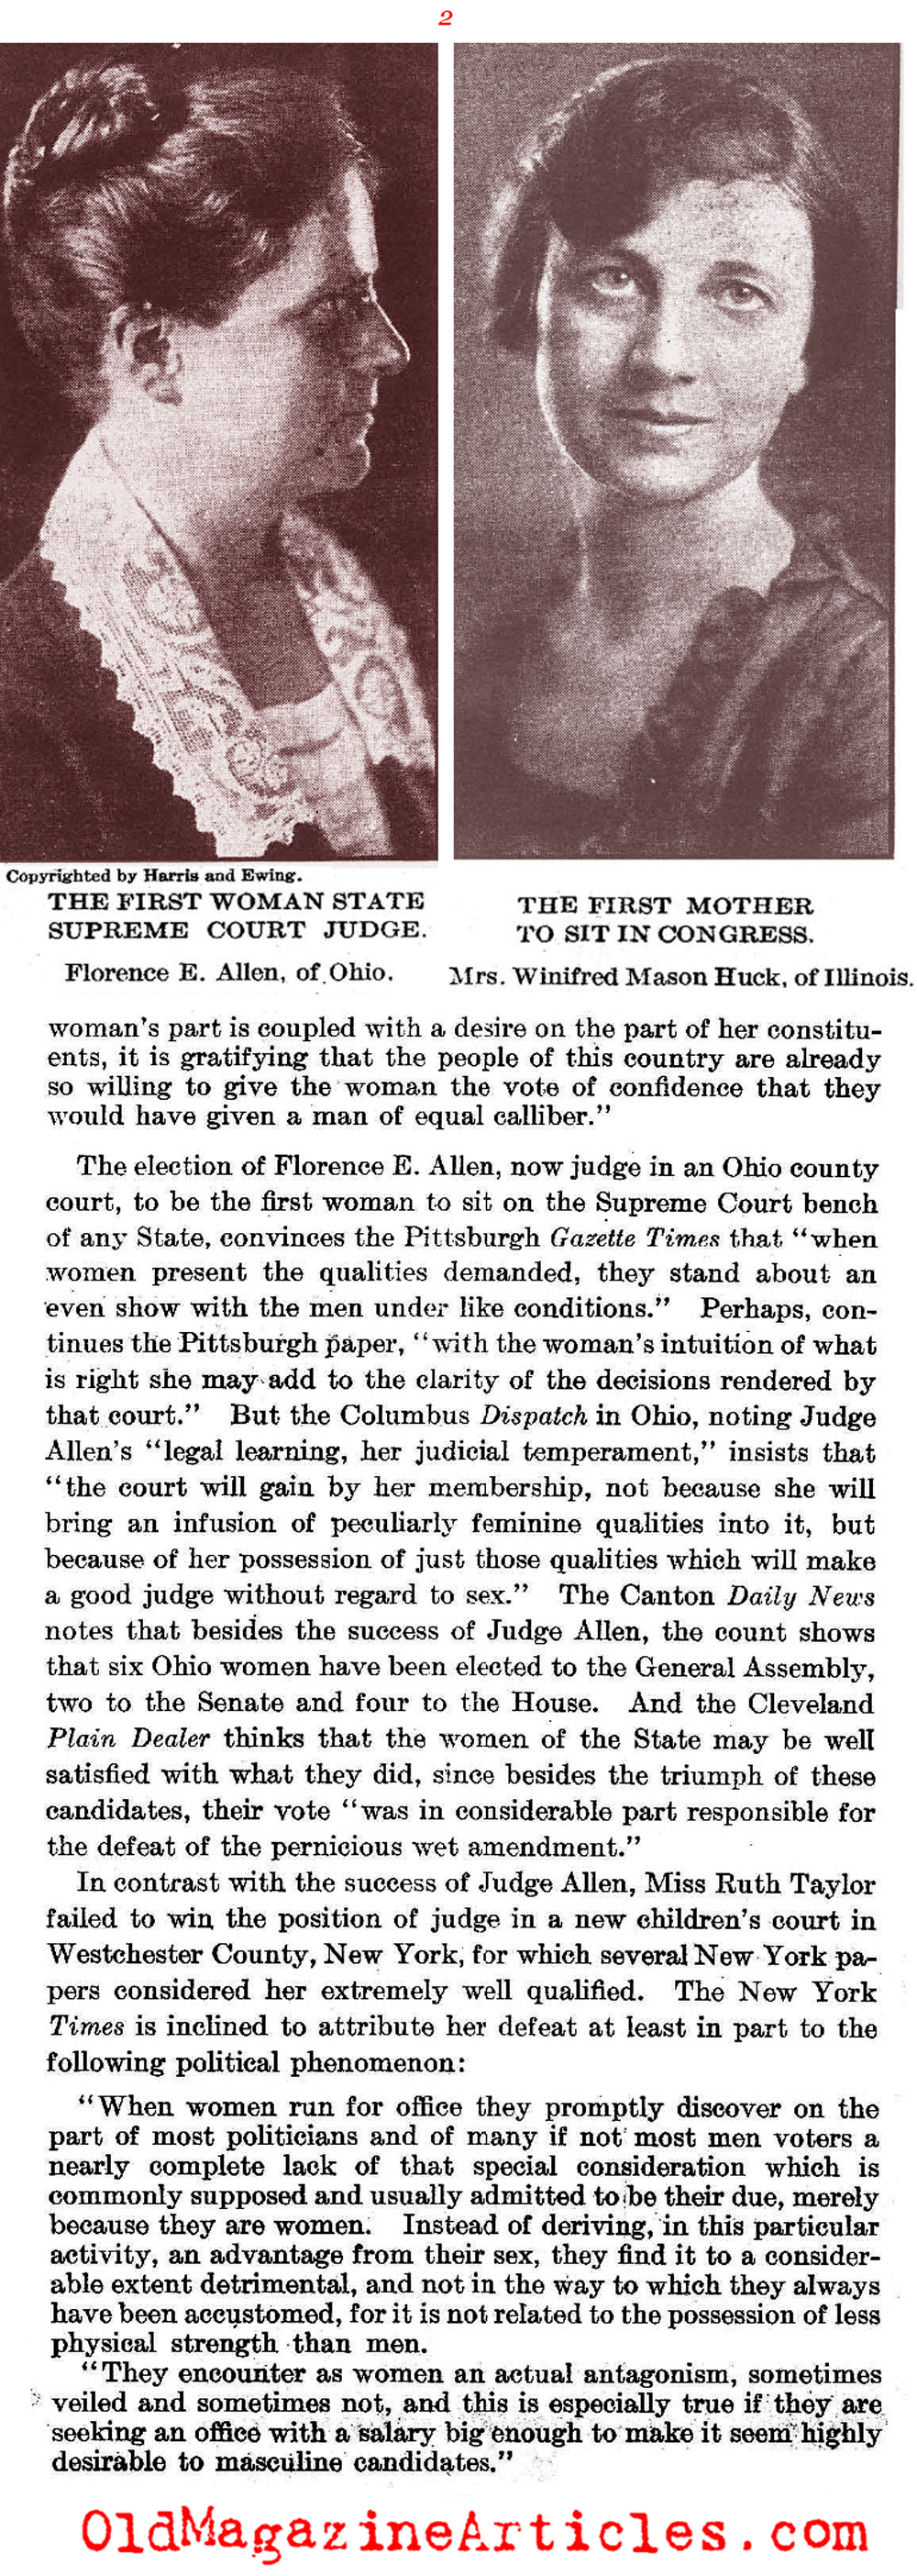 The 1922  U.S. Elections: Some Wins But Mostly Defeats   (The Literary Digest, 1922)